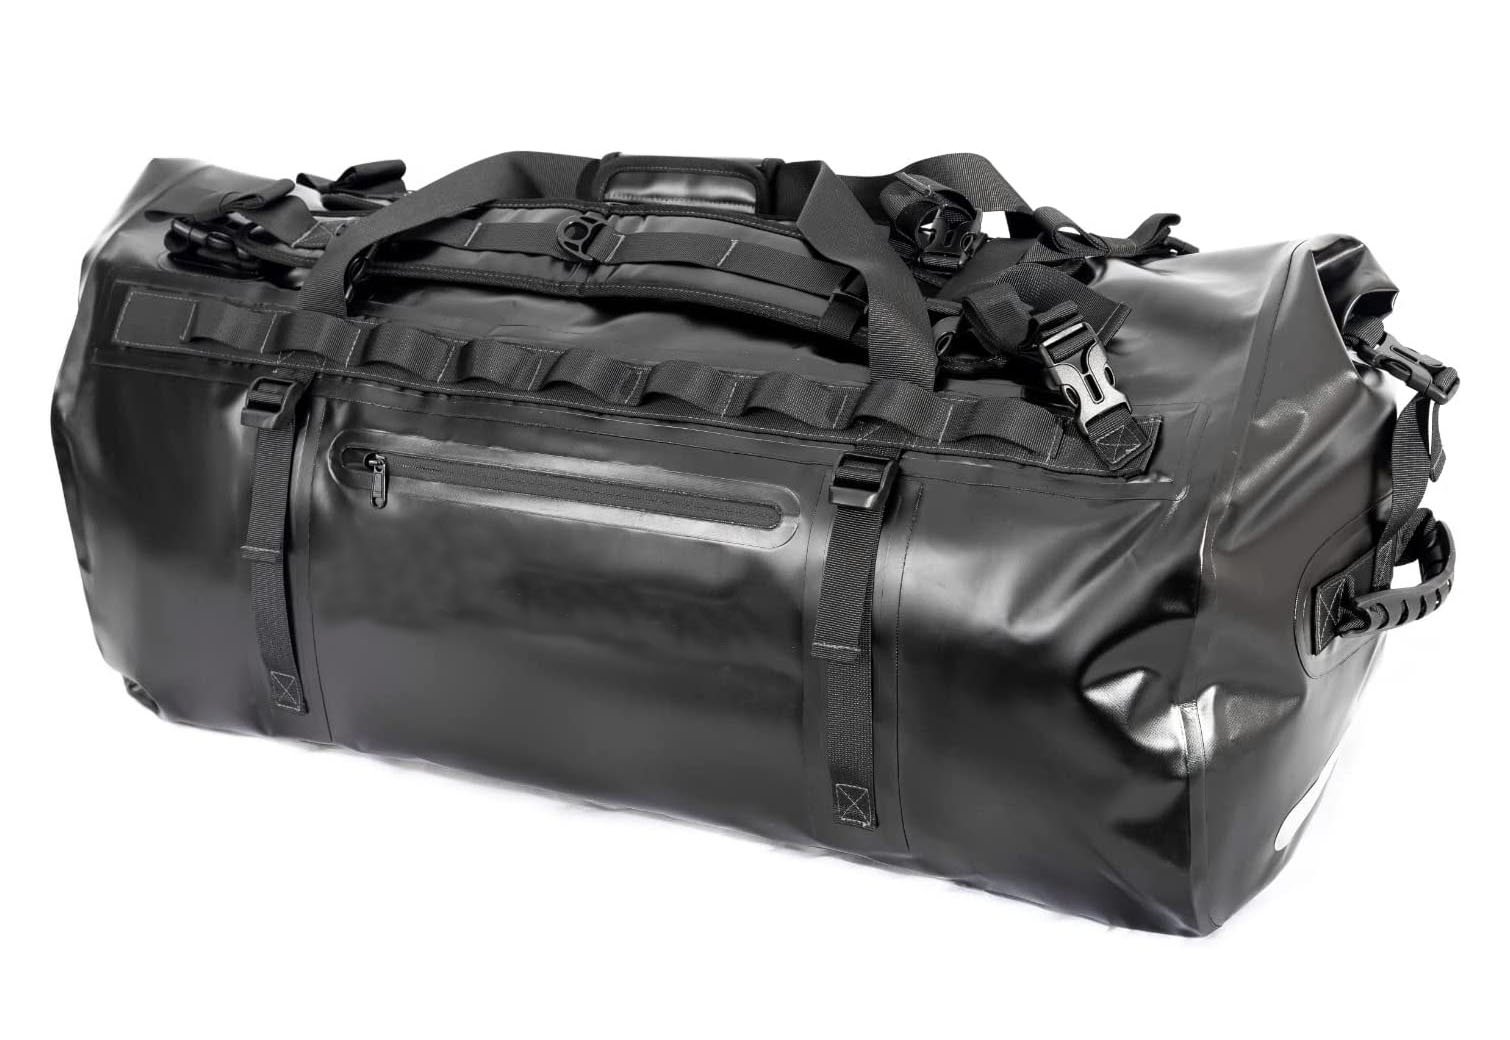 Heavy Duty Waterproof Duffel Bag 110L Perfect for Any Kind of Travel Boating Motorcycling